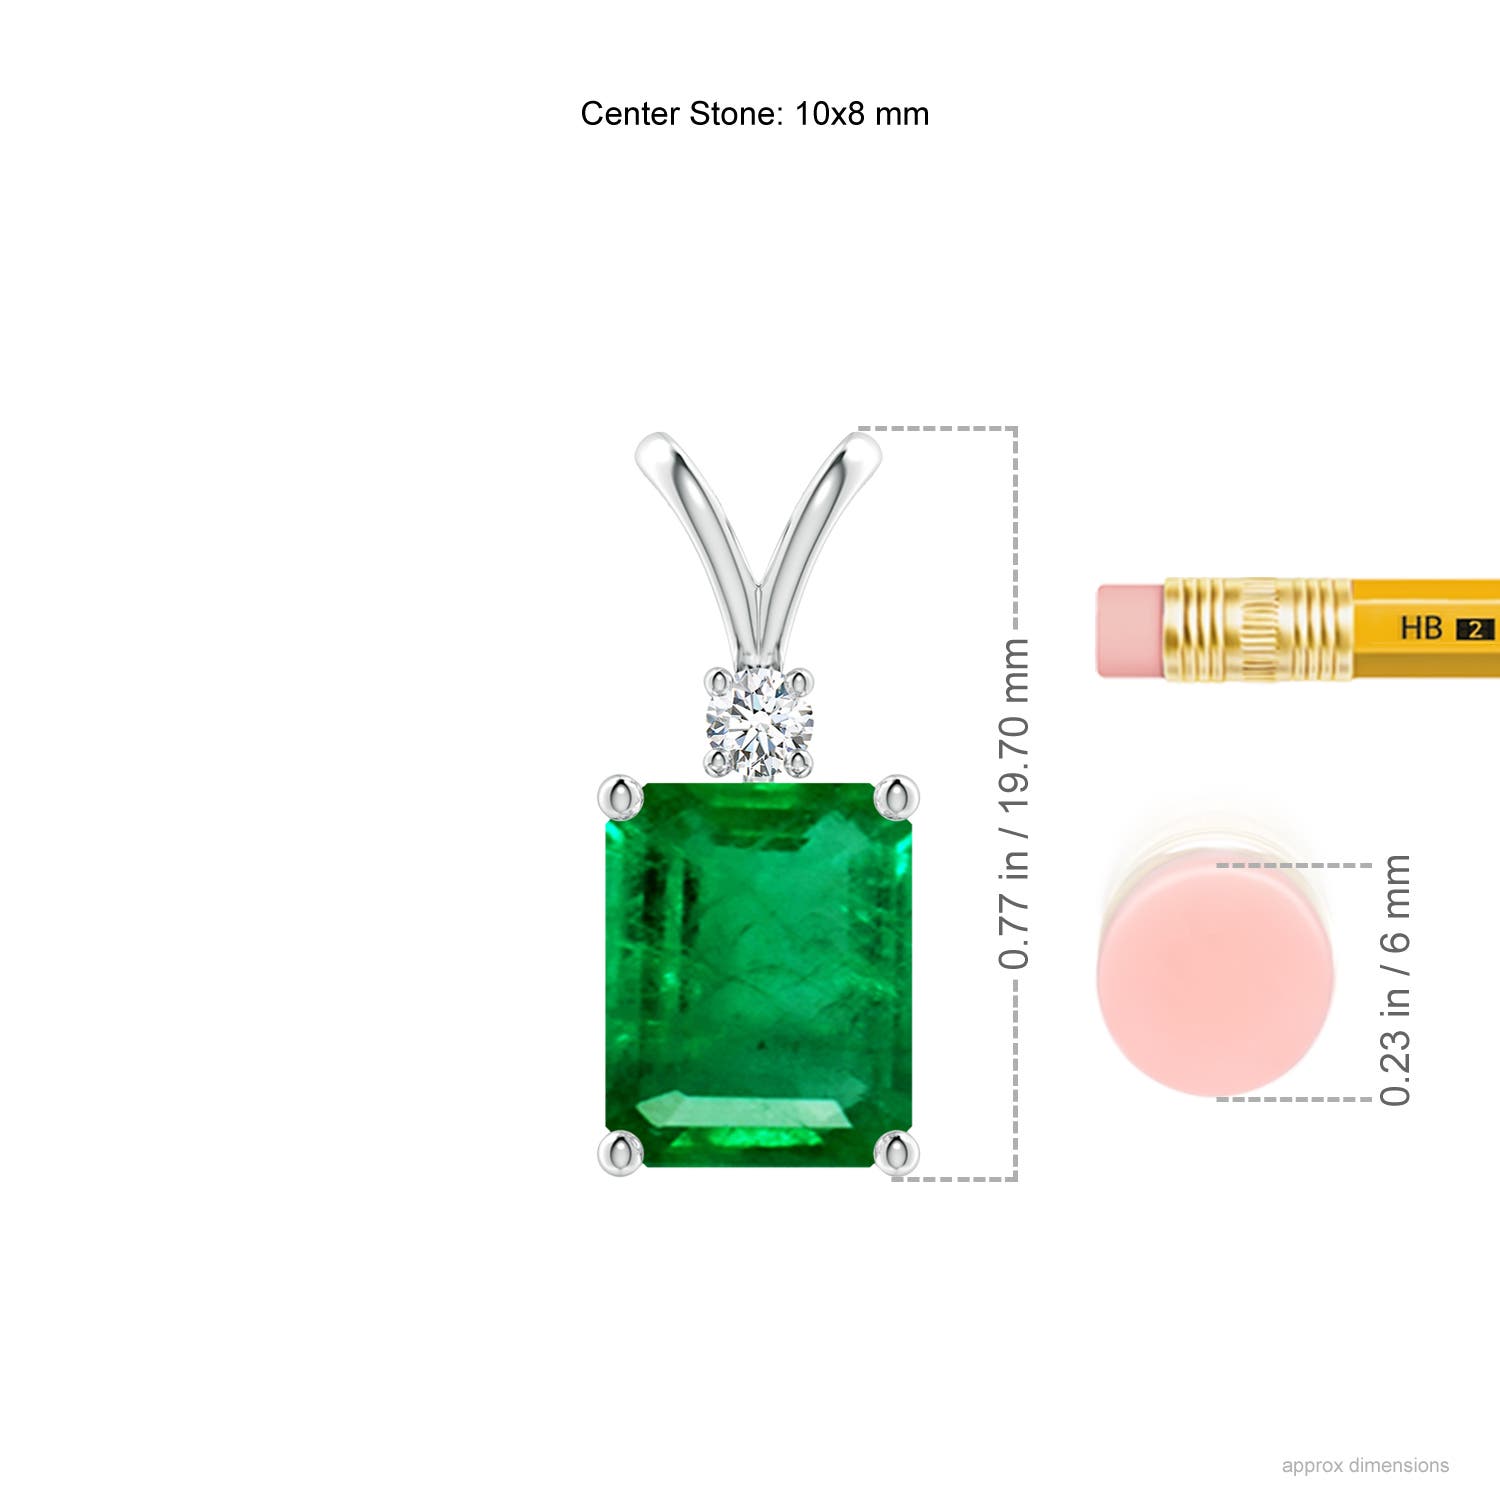 AAA - Emerald / 2.96 CT / 14 KT White Gold